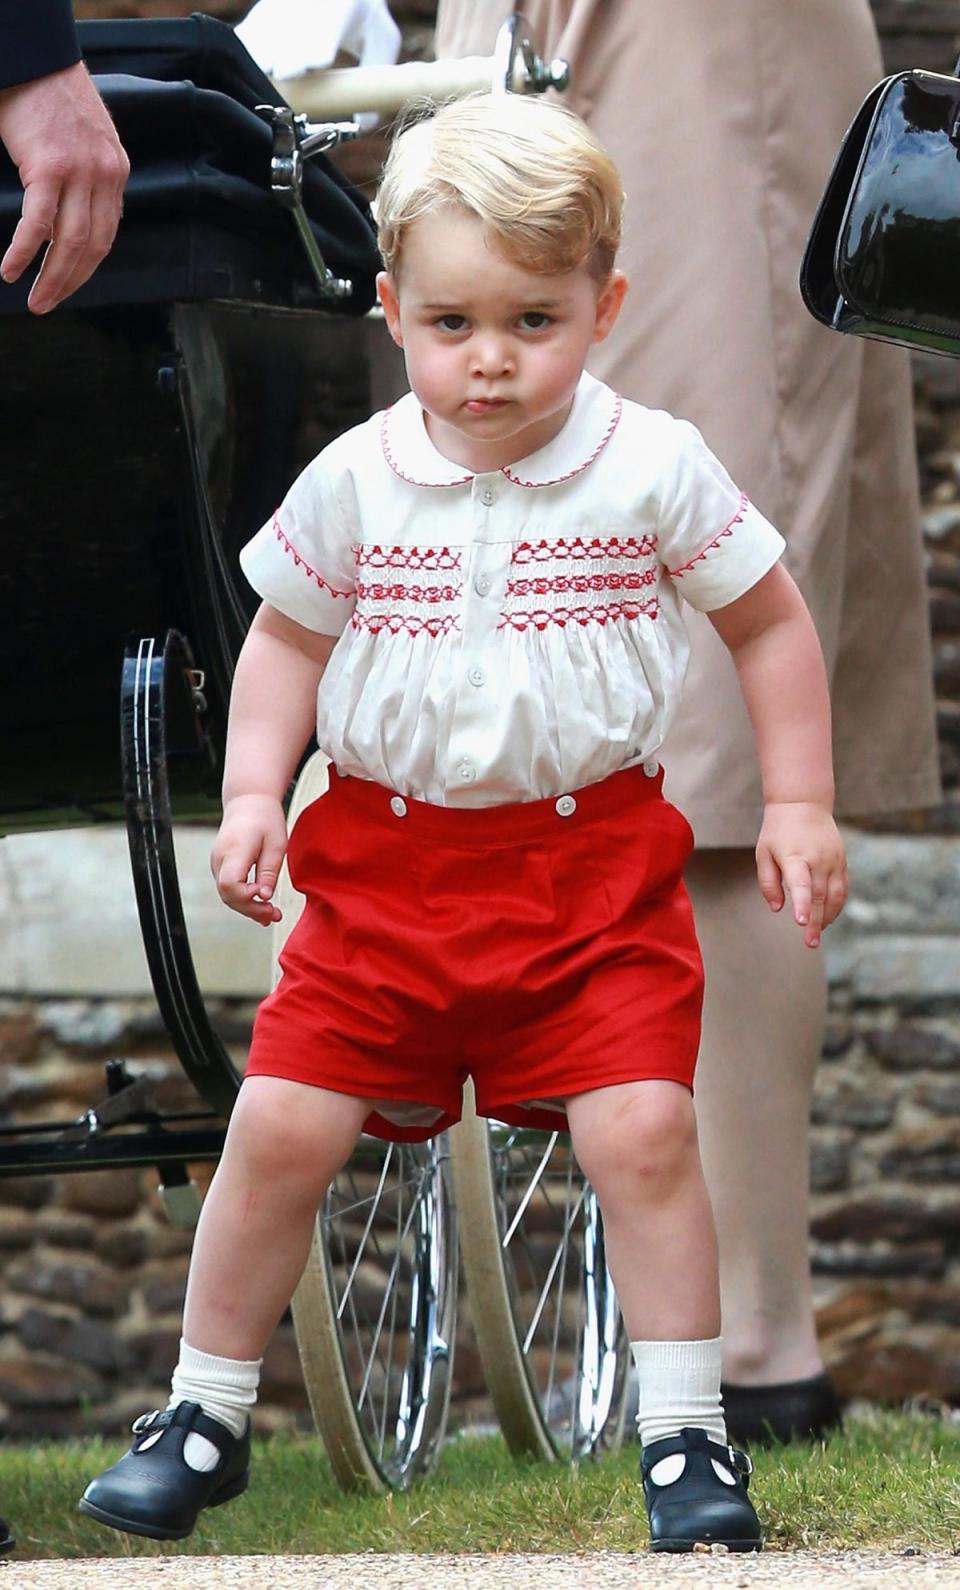 Princess Charlotte, 2015: For his sister, Princess Charlotte’s christening, Prince George wore a pair of smocked red shorts and an embroidered shirt by British designer Rachel Riley.Following his appearance at the church, Riley’s website had sold out of the outside in 12 month and 18 month sizes. The outfit was almost identical to the one worn by his father, the Duke of Cambridge, when he was first taken to see his newborn brother Prince Harry in hospital in 1984. (Getty Images)